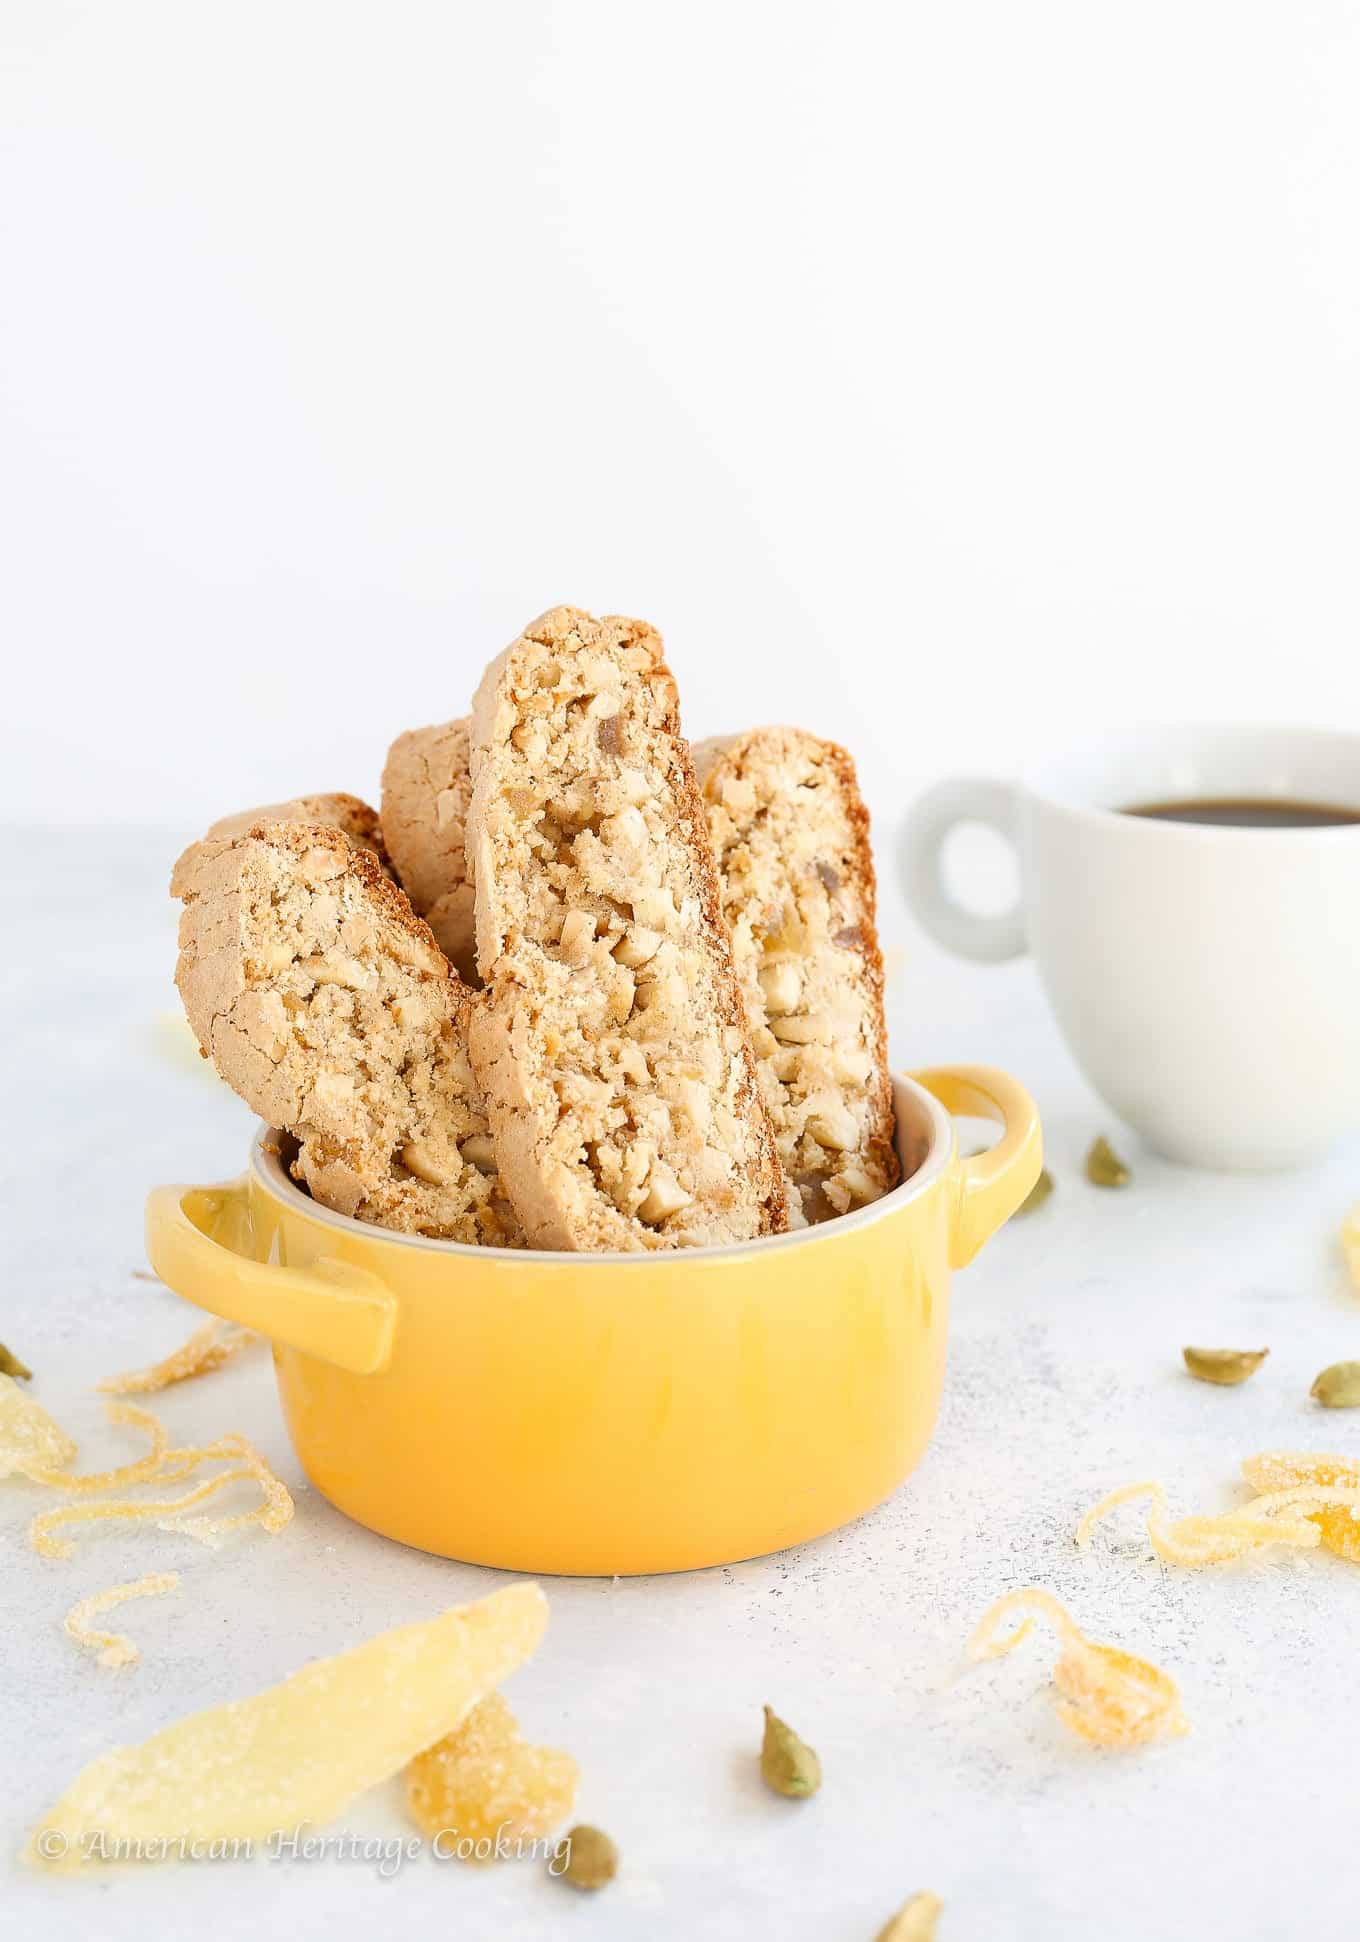 These sensational Ginger Orange Almond Biscotti are a little bit spicy and bit sweet! They have notes of ginger, orange, cardamom and cinnamon all baked to crispy perfection. Perfect for dunking in coffee or just snacking! 